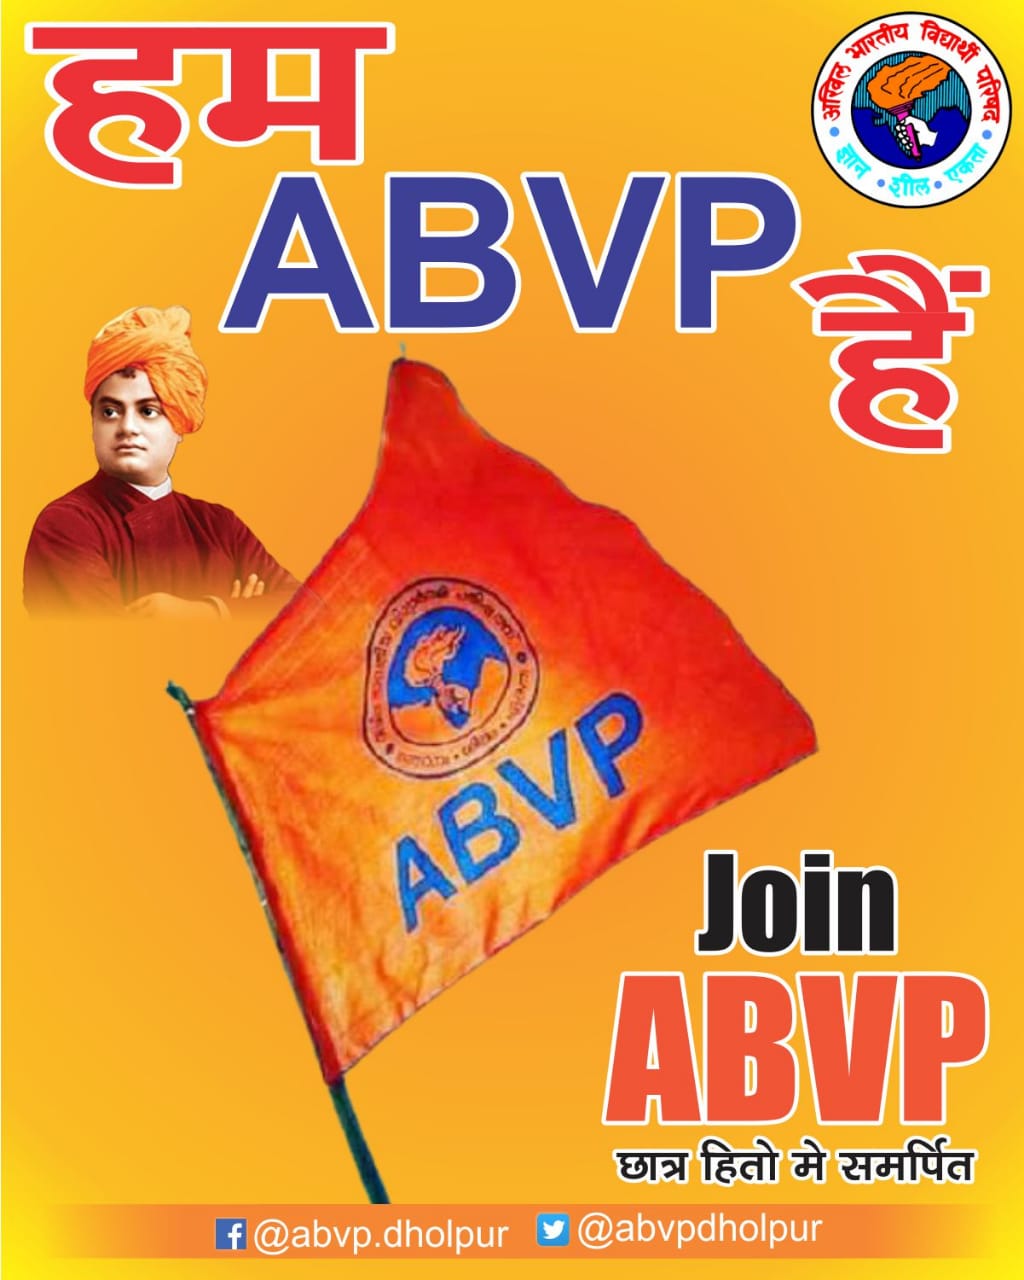 Abvp Dholpur Rajsthan on Twitter: 